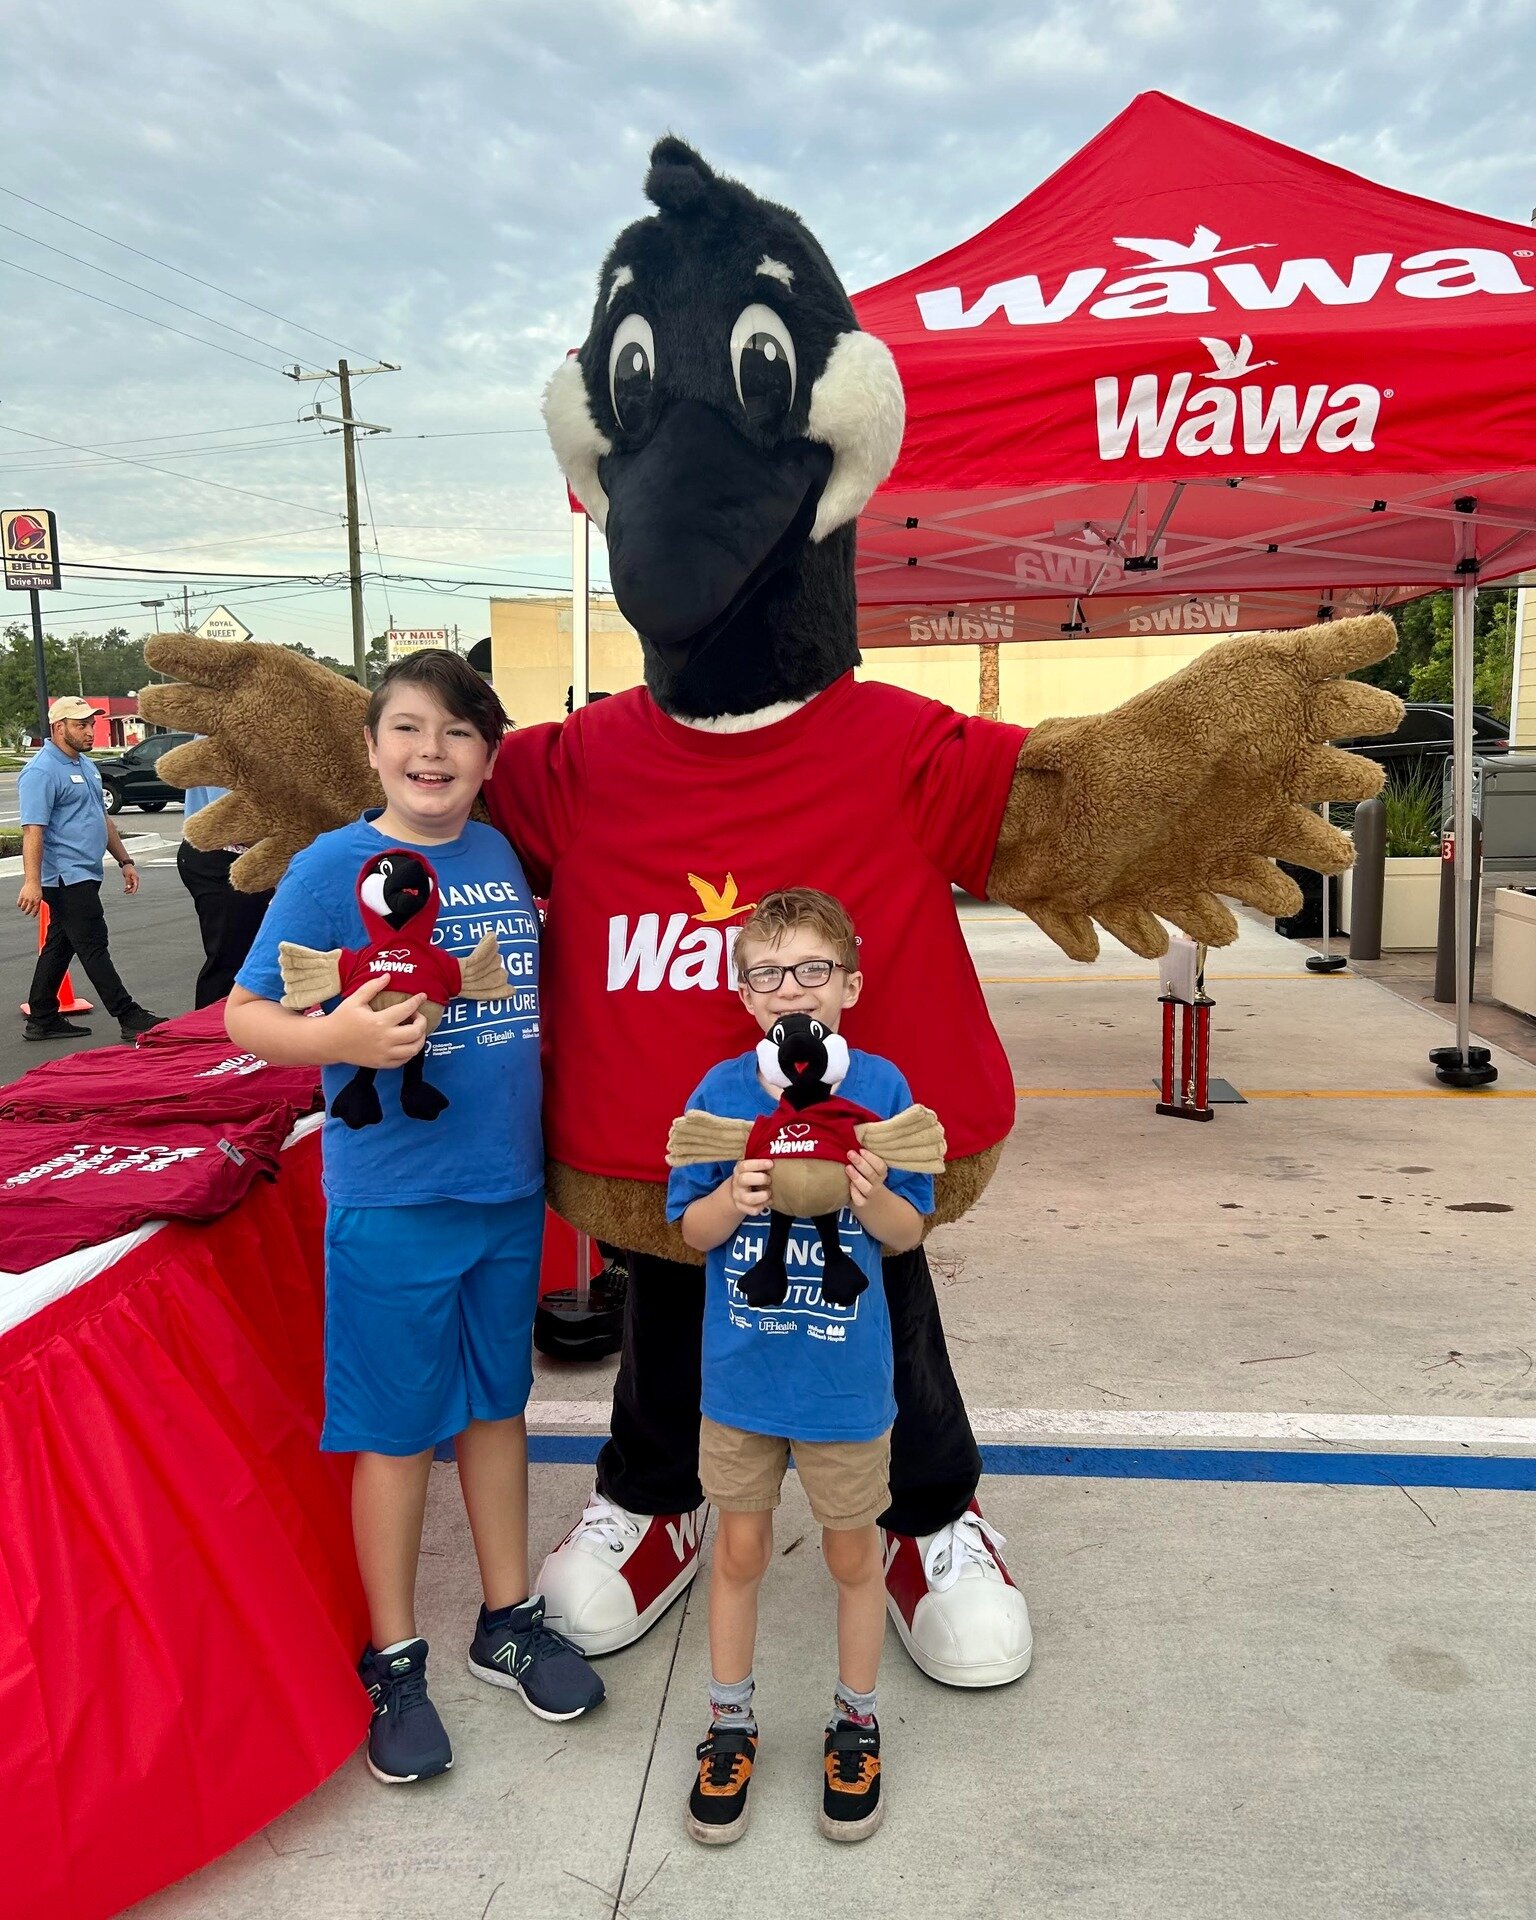 Visit our partner @wawa  from today until May 19 to support your local @cmnhospitals, @ufhealthjax and @wolfsonchildren! #changekidshealth #changethefuture